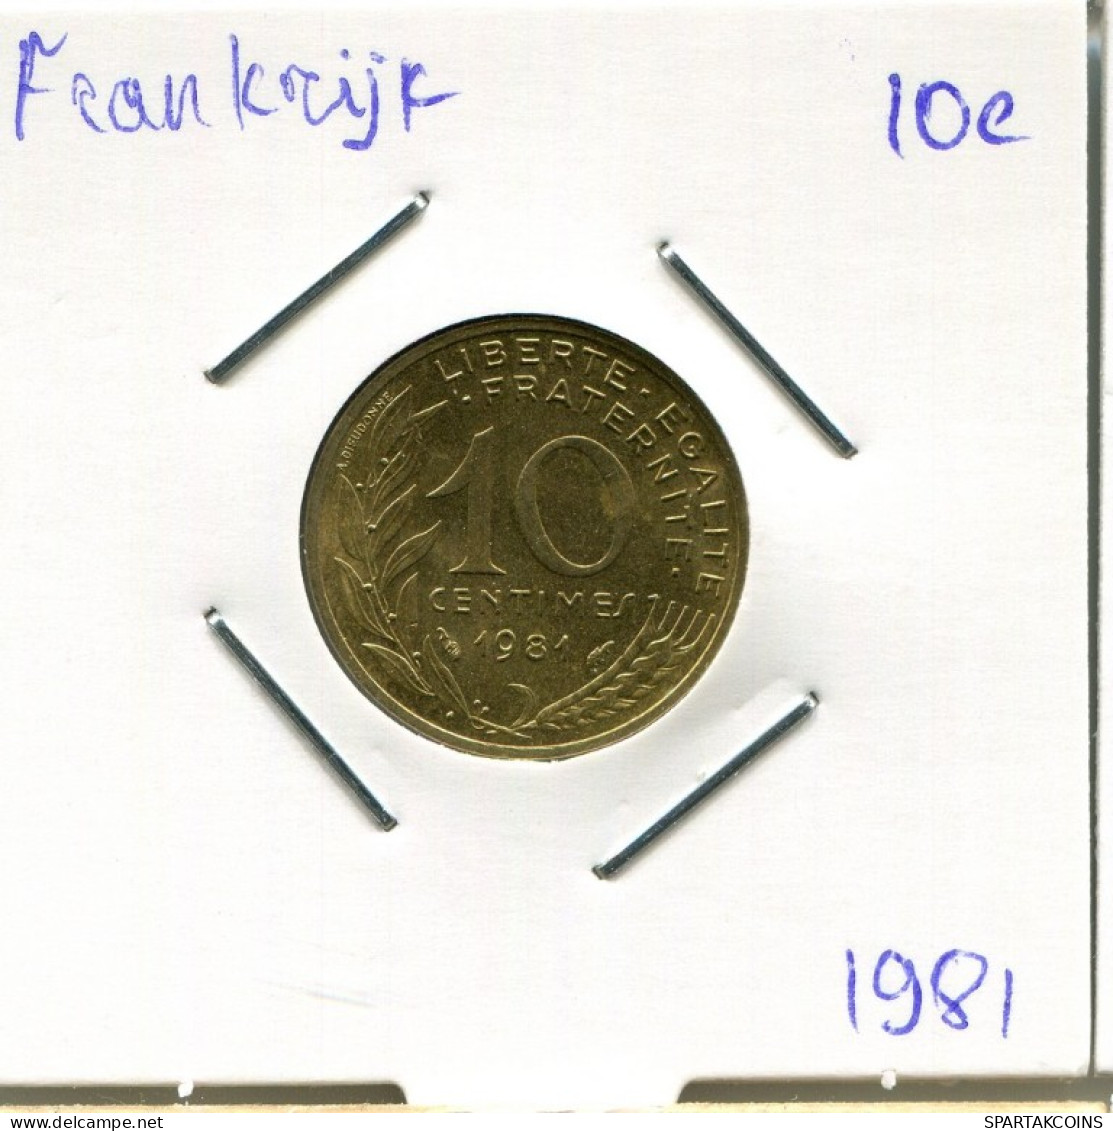 10 CENTIMES 1981 FRANCE Coin French Coin #AM822.U.A - 10 Centimes